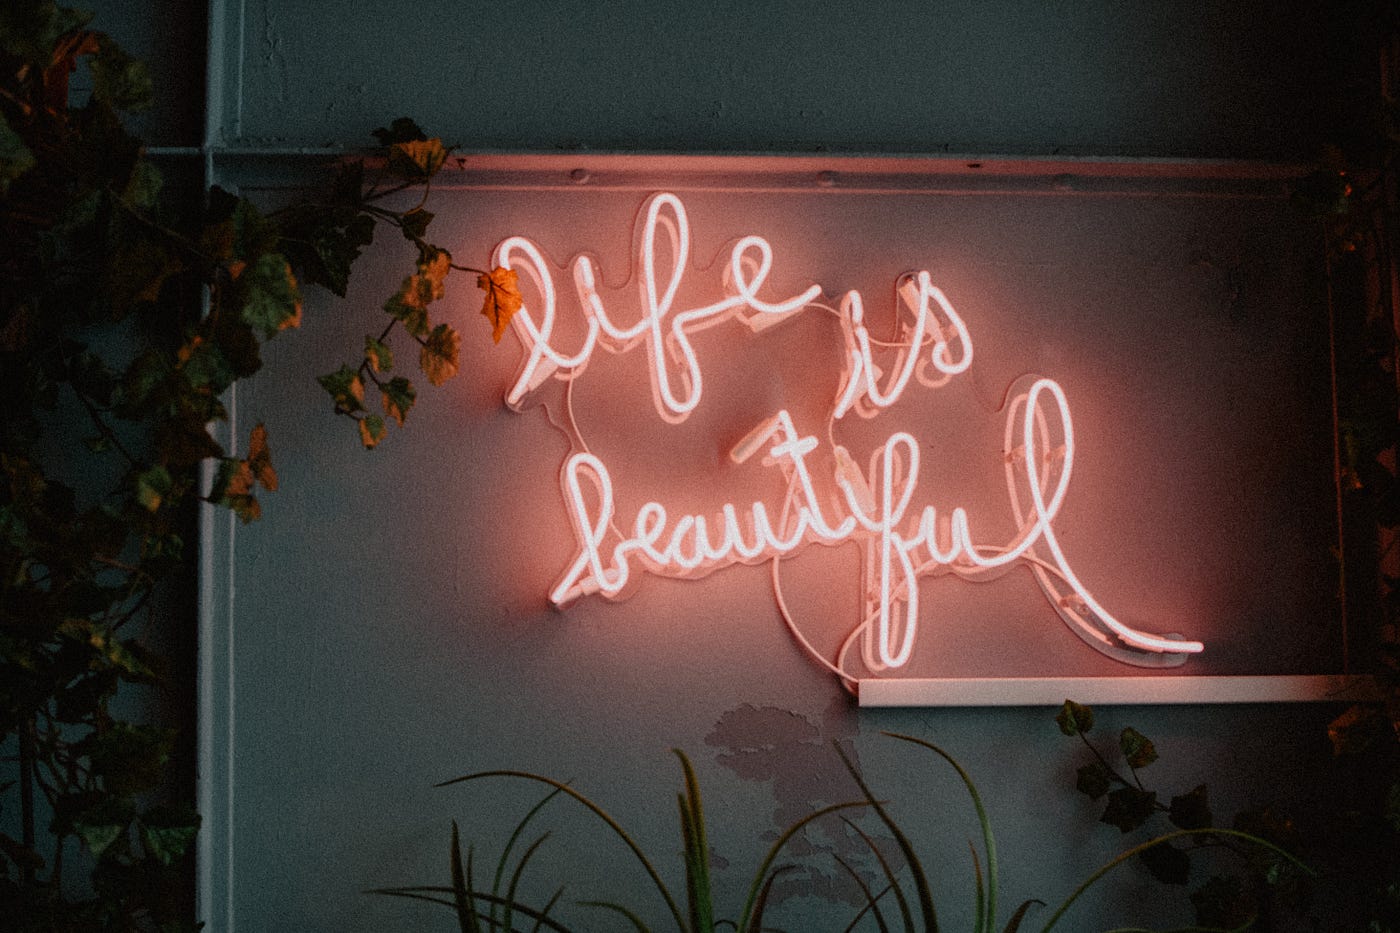 A neon “life is beautiful” sign.